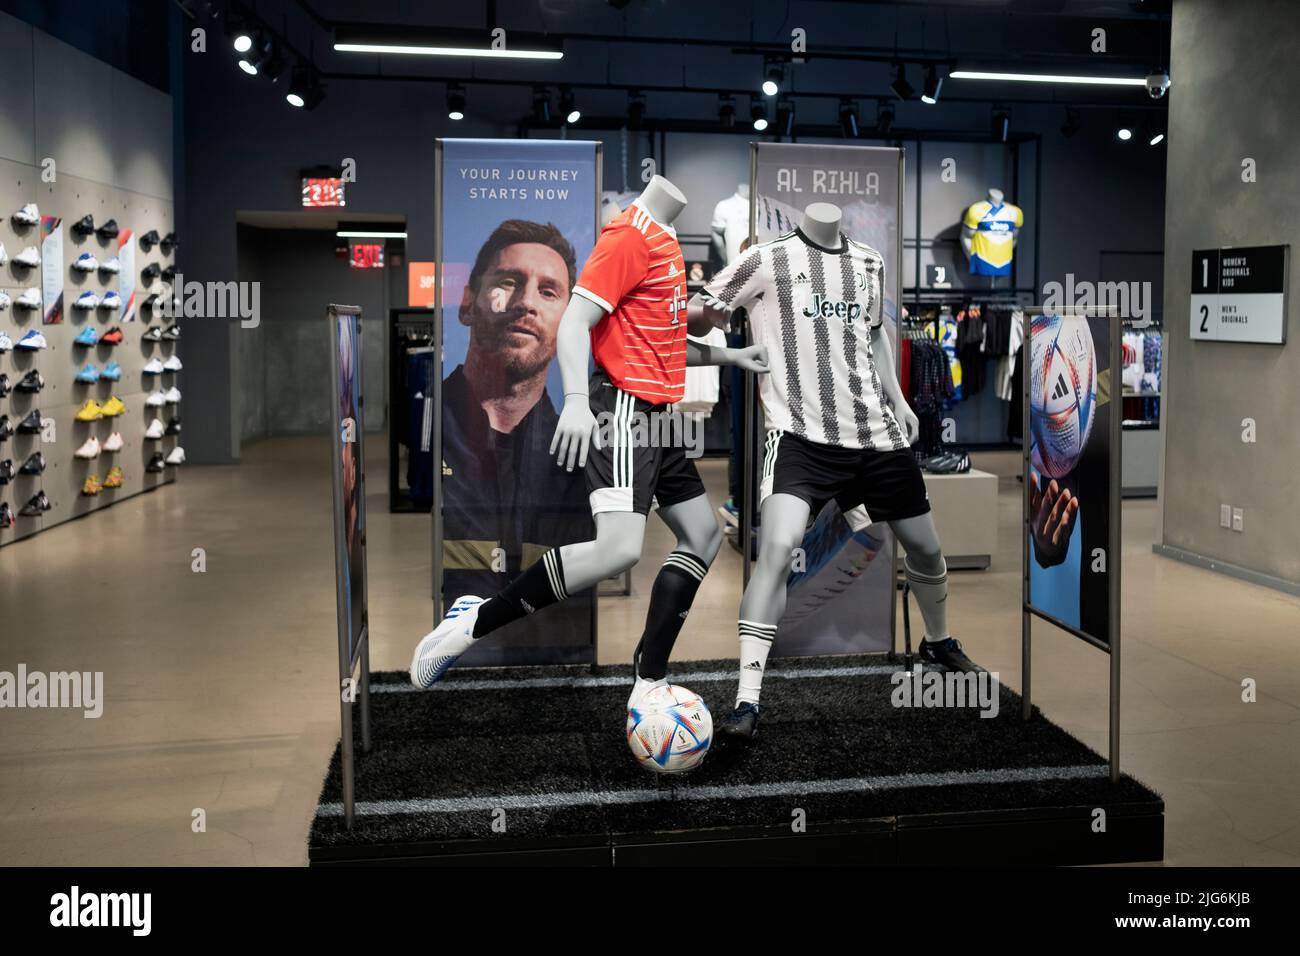 The soccer section of the Adidas store on Broadway in Manhattan featuring a Juventus jersey & a photo of the great Lionel Messi. on Broadway in NYC. Stock Photo